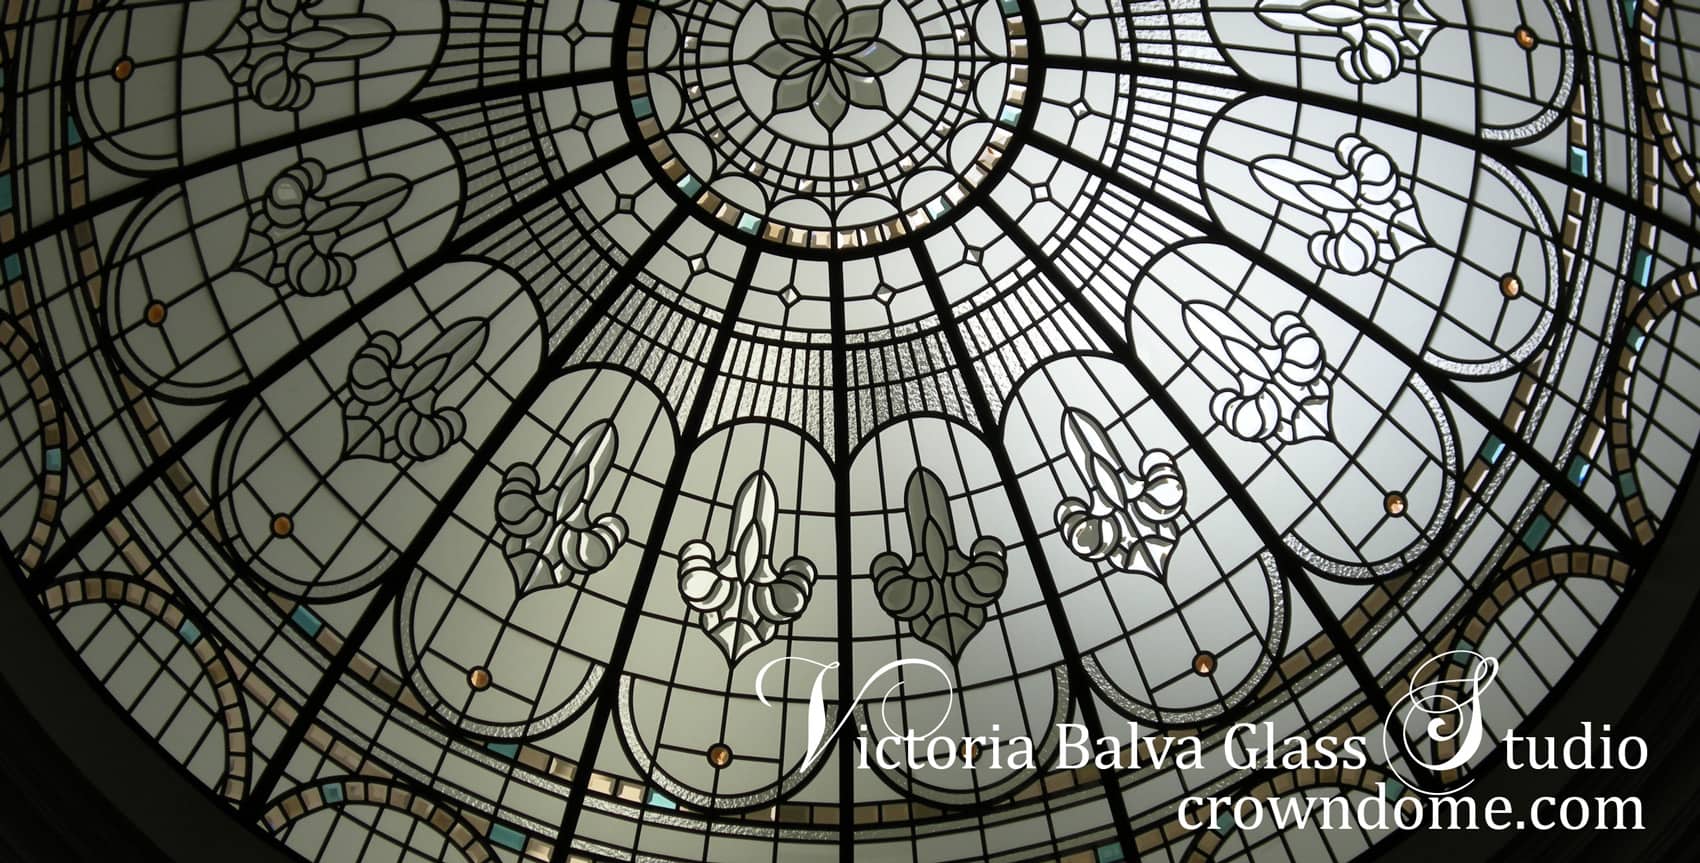 Custom stained and leaded glass dome in traditional style by glass artist Victoria Balva